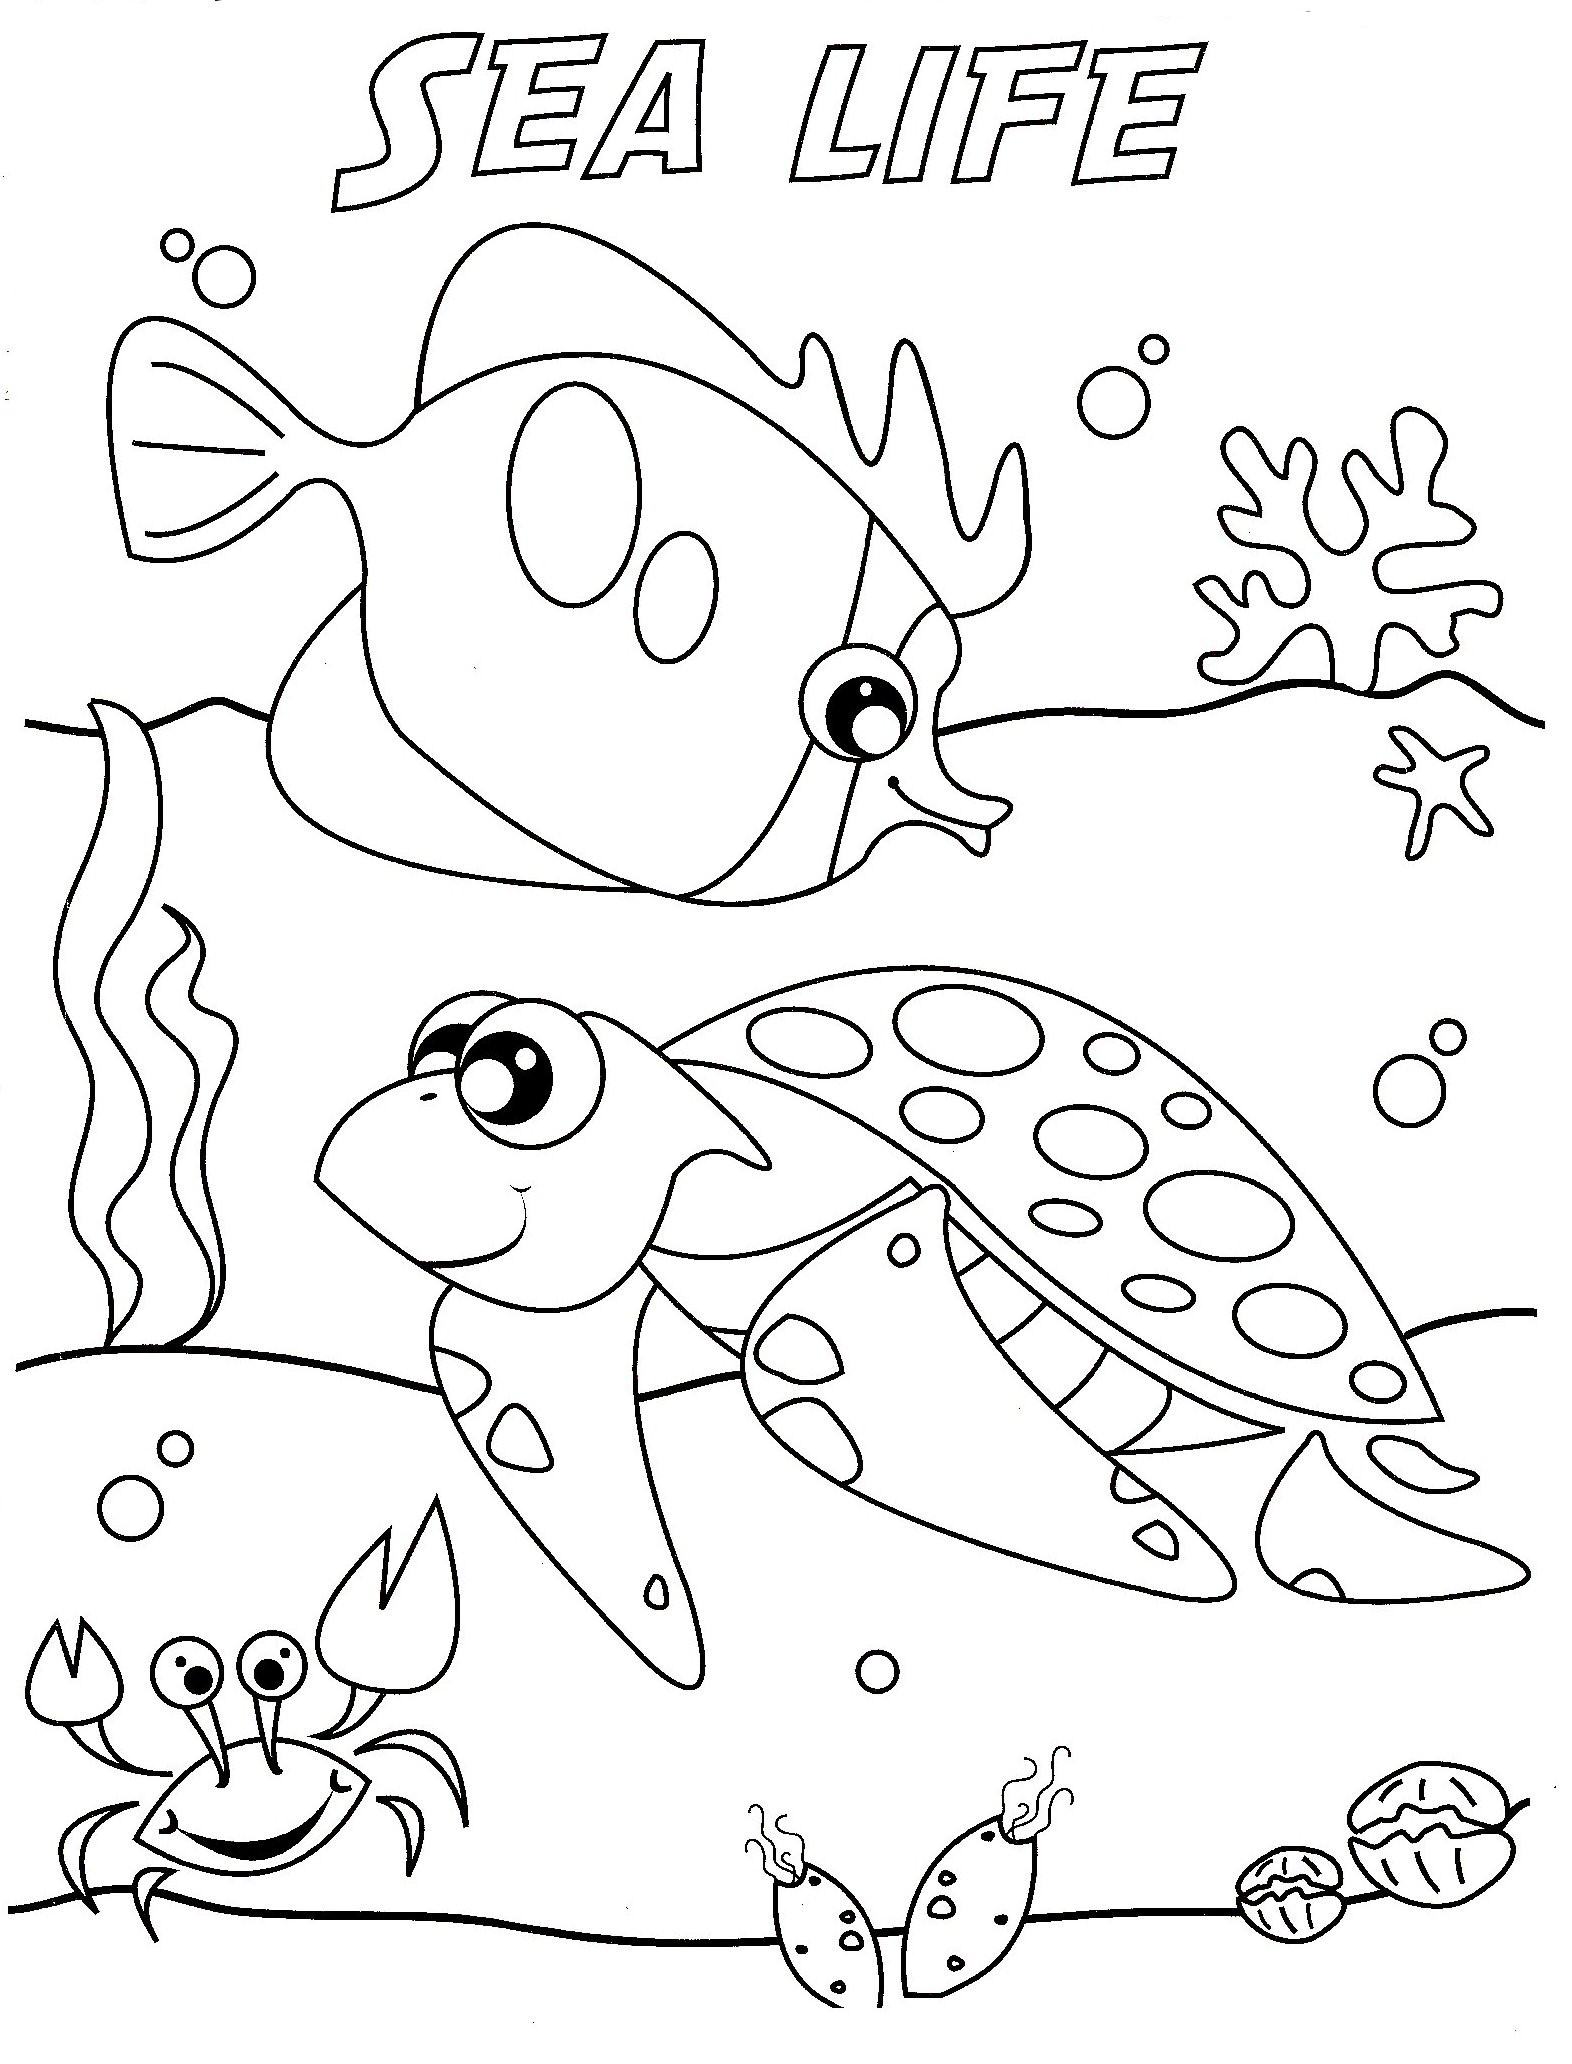 841 Cartoon Coloring Pages Of Marine Animals for Kindergarten